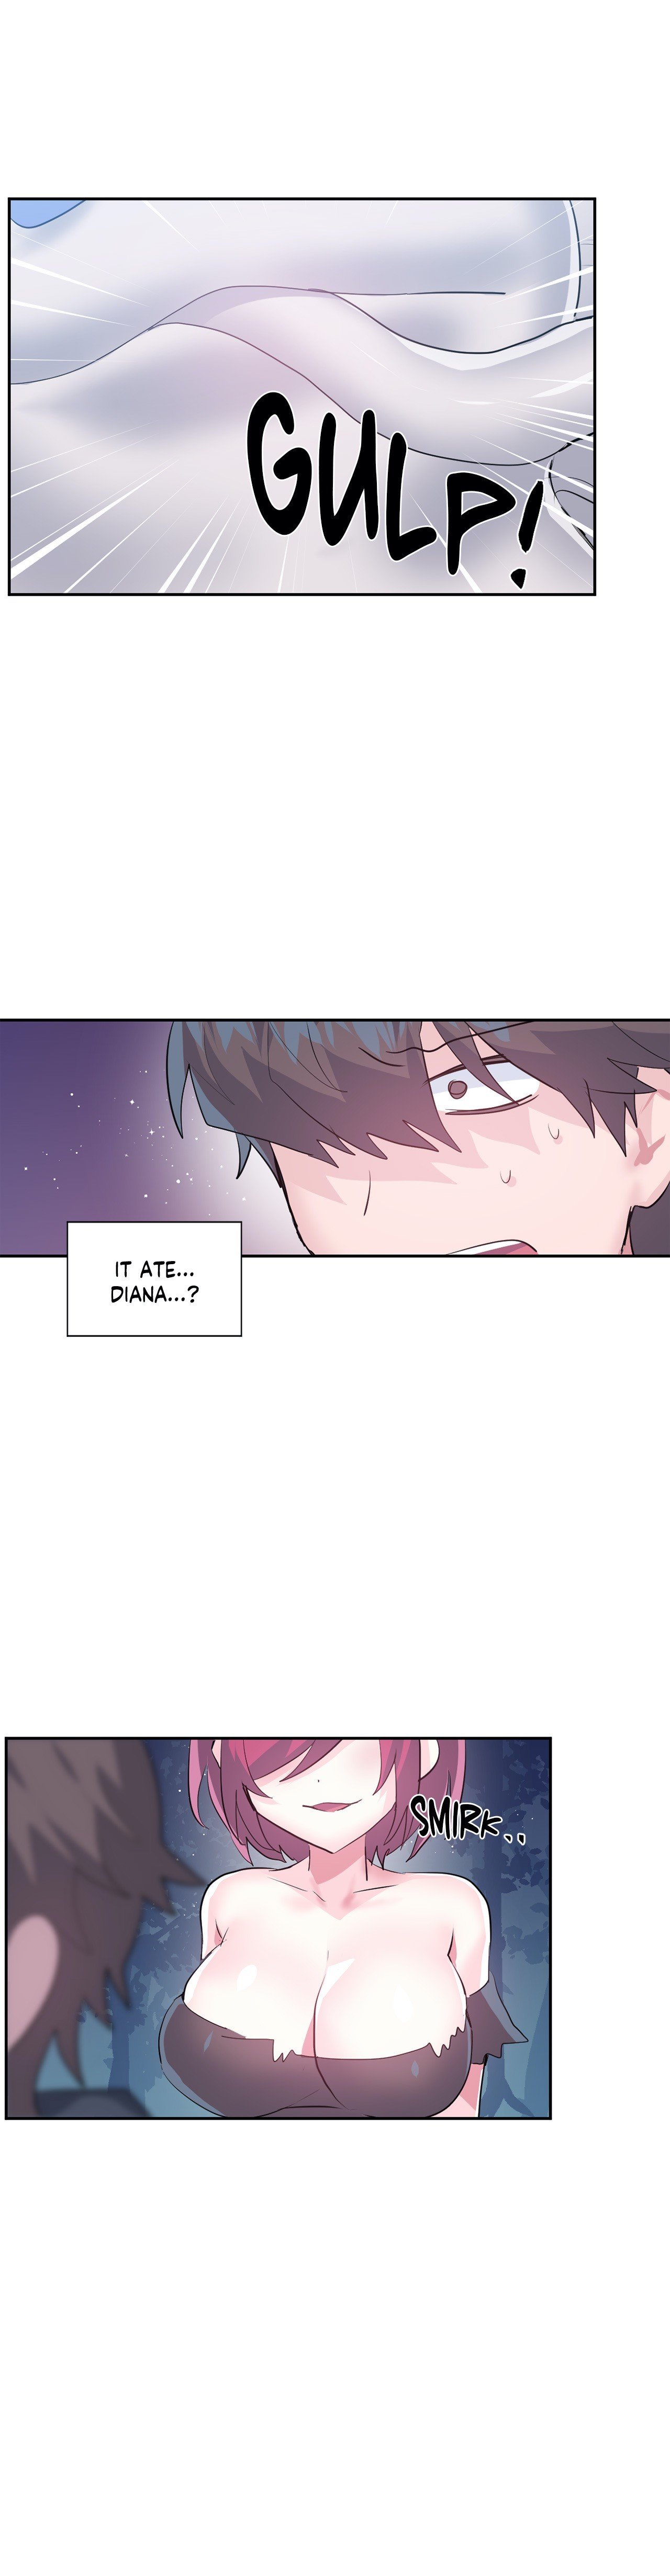 log-in-to-lust-a-land-chap-38-3